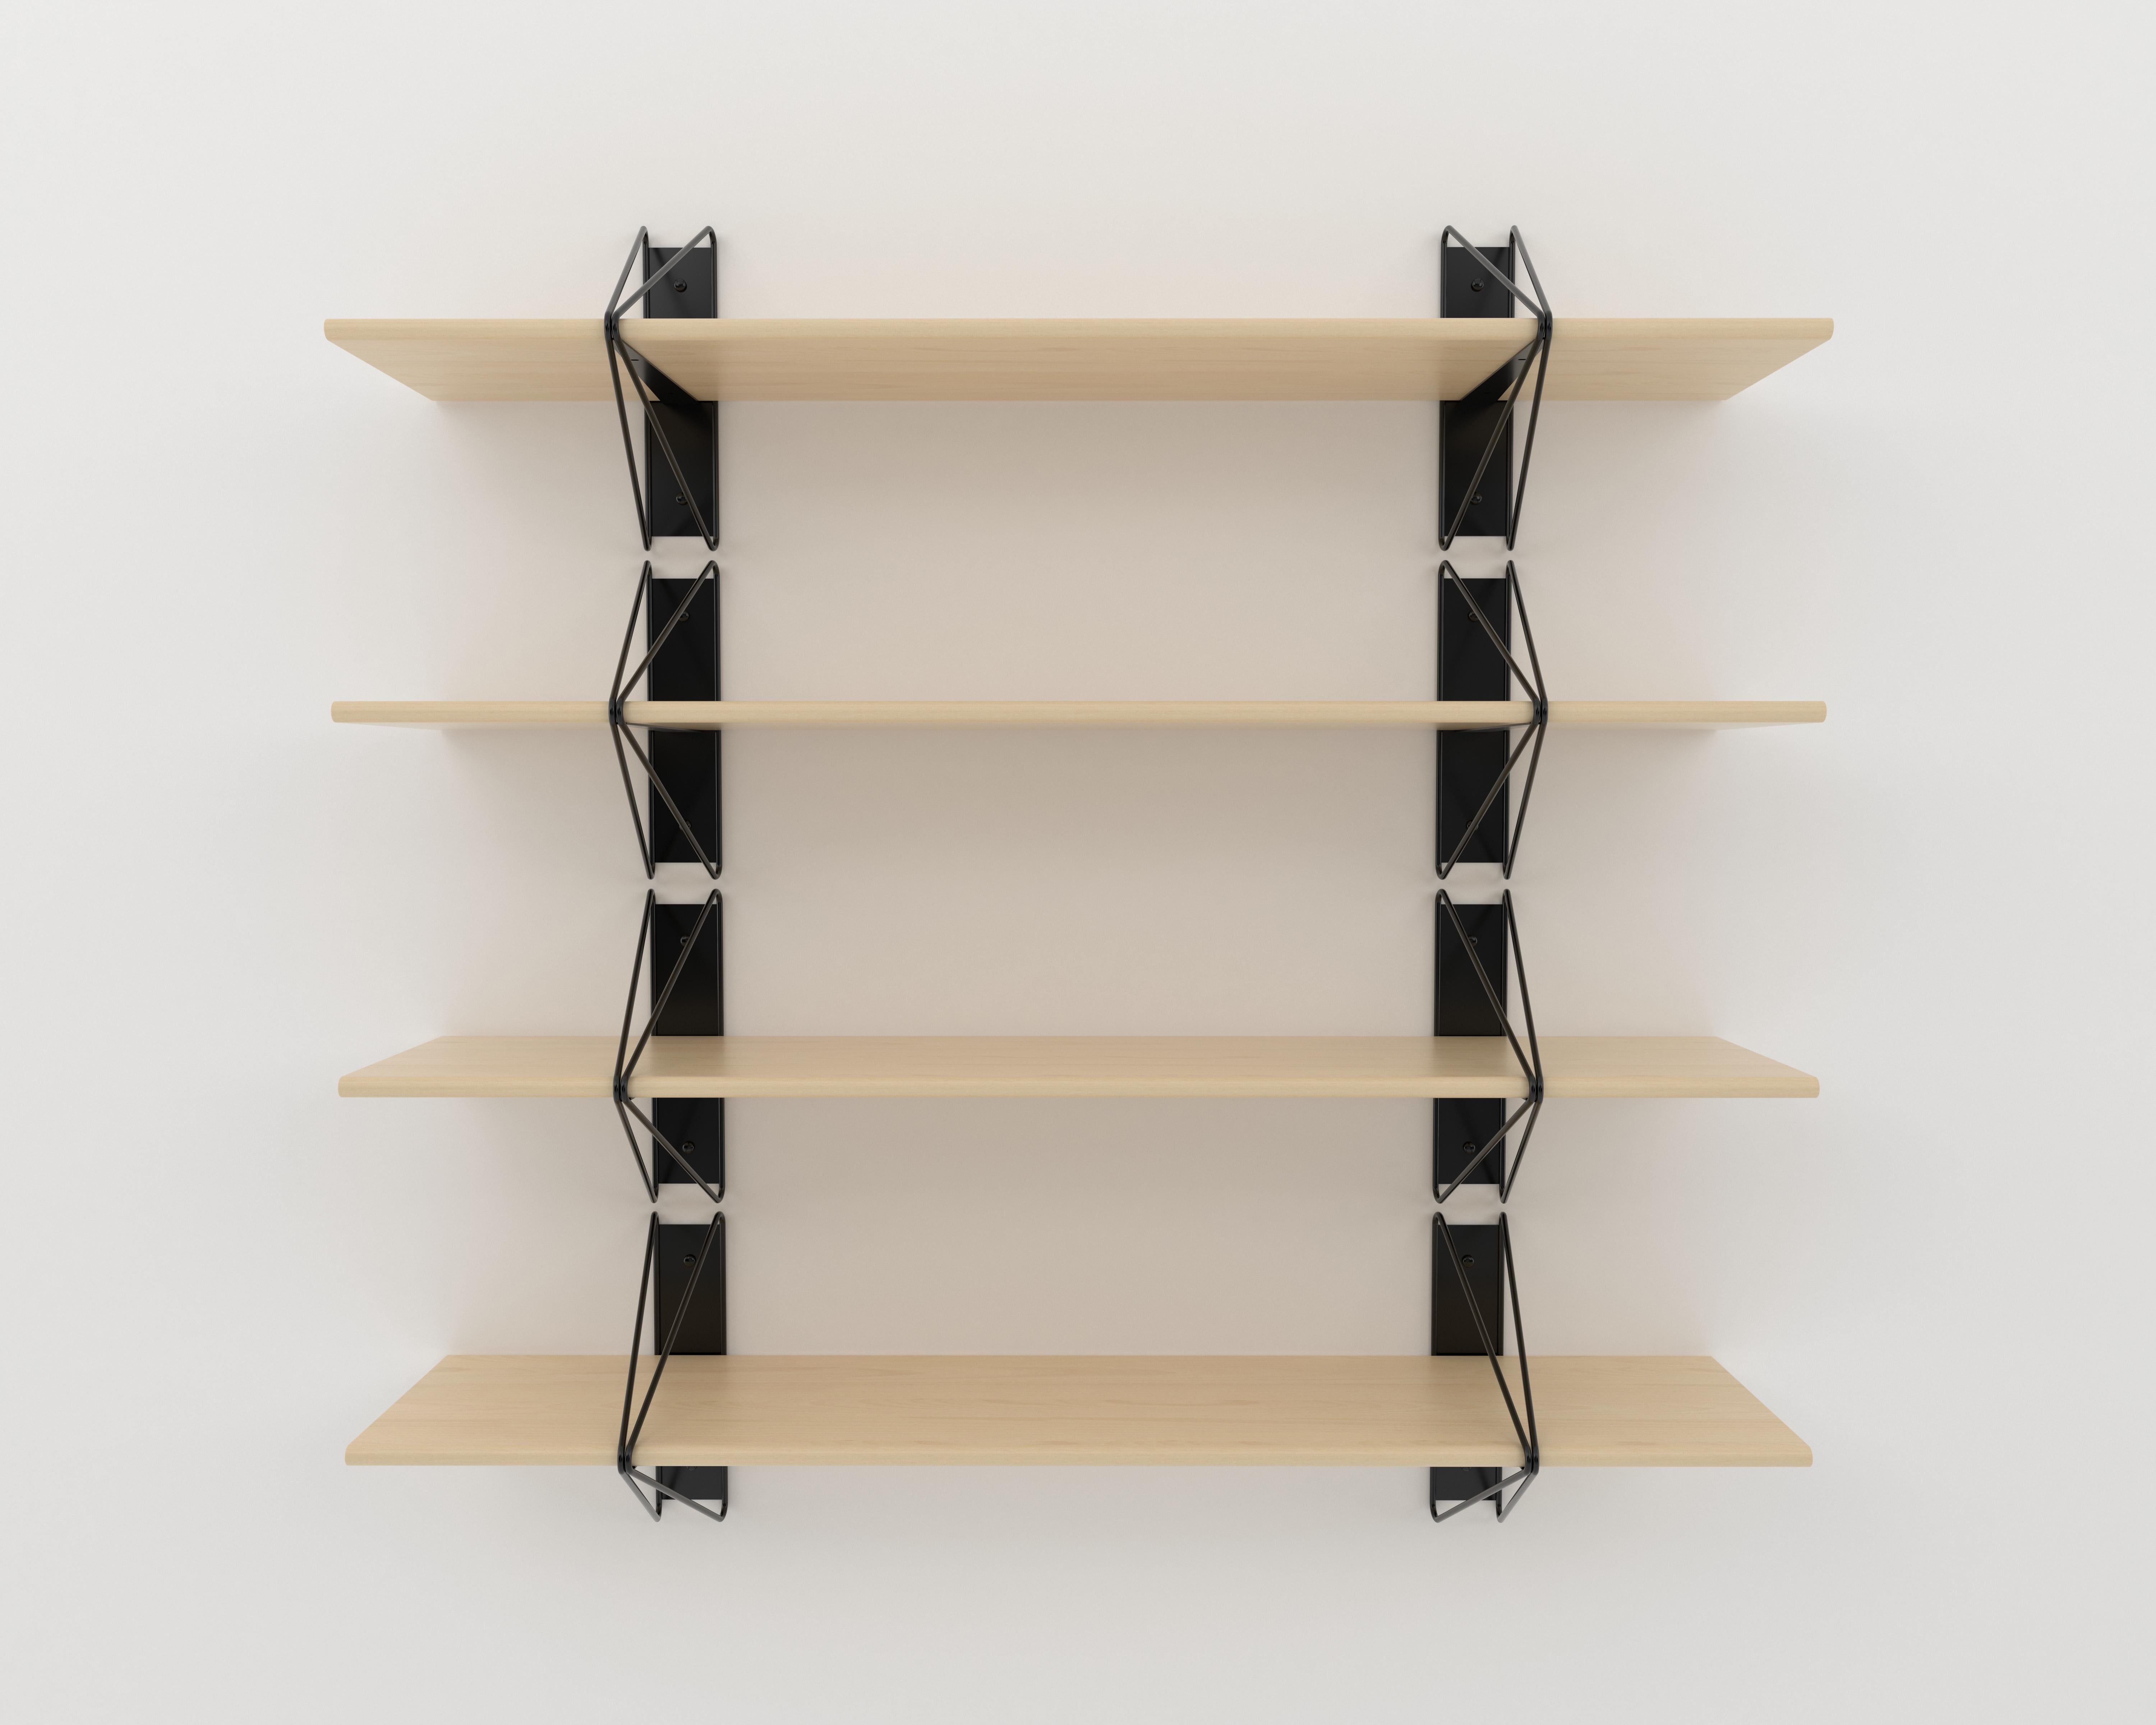 Oiled Set of 4 Strut Shelves from Souda, 52in, Black and Walnut, Made to Order For Sale